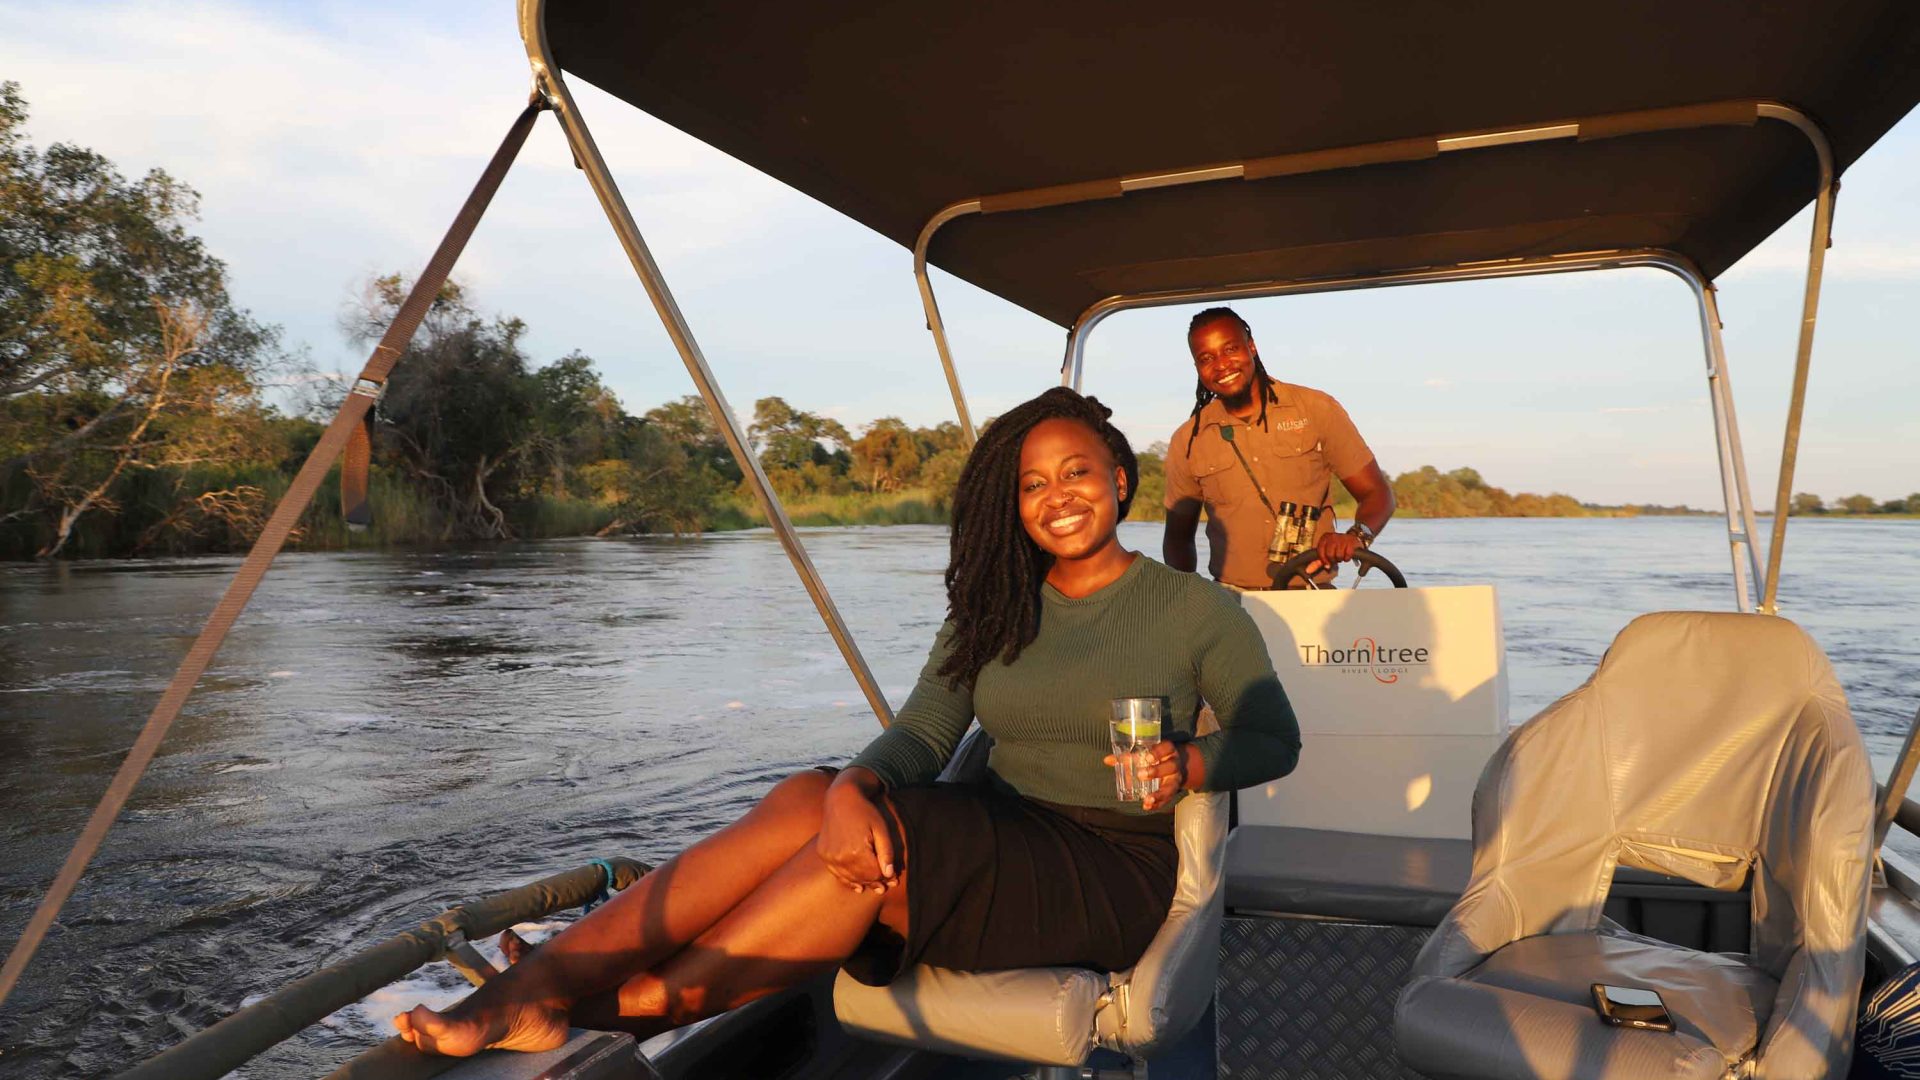 A woman enjoys a drink while on a boat in a river. The driver of the boat smiles behind her.